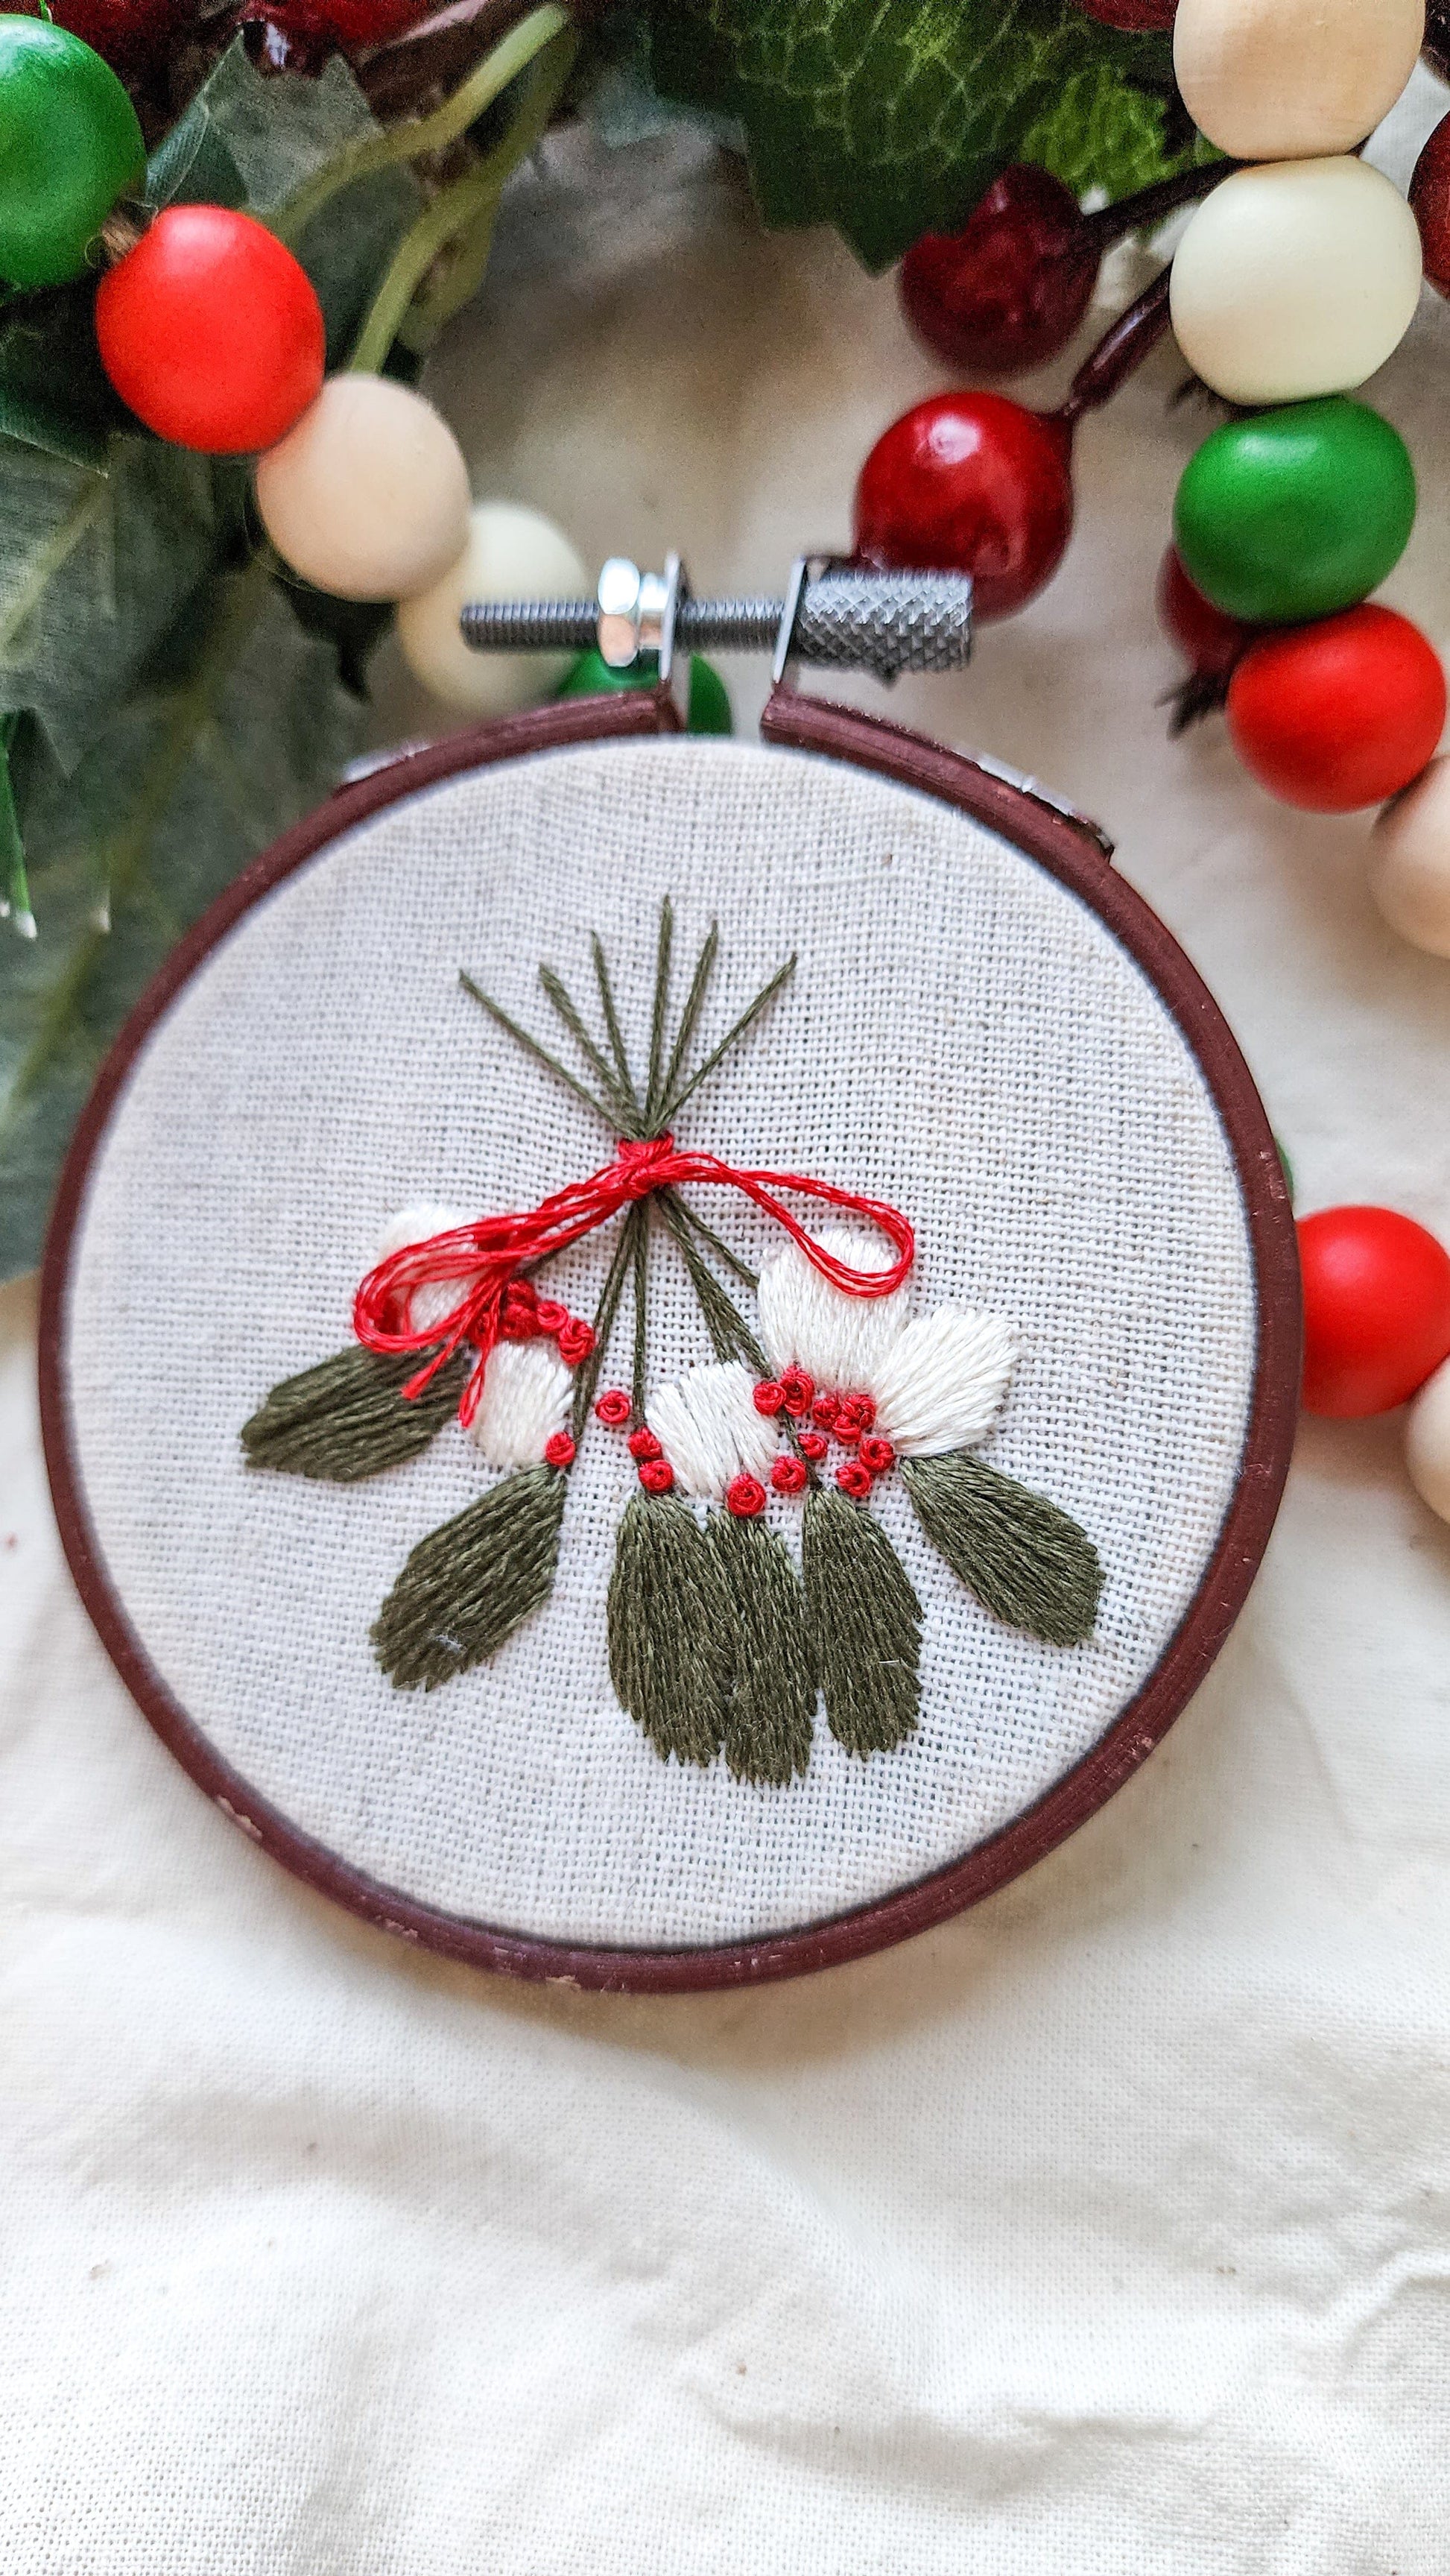 Embrace Embroidery Copy of Embroidered Holiday Ornament - Tree in a basket